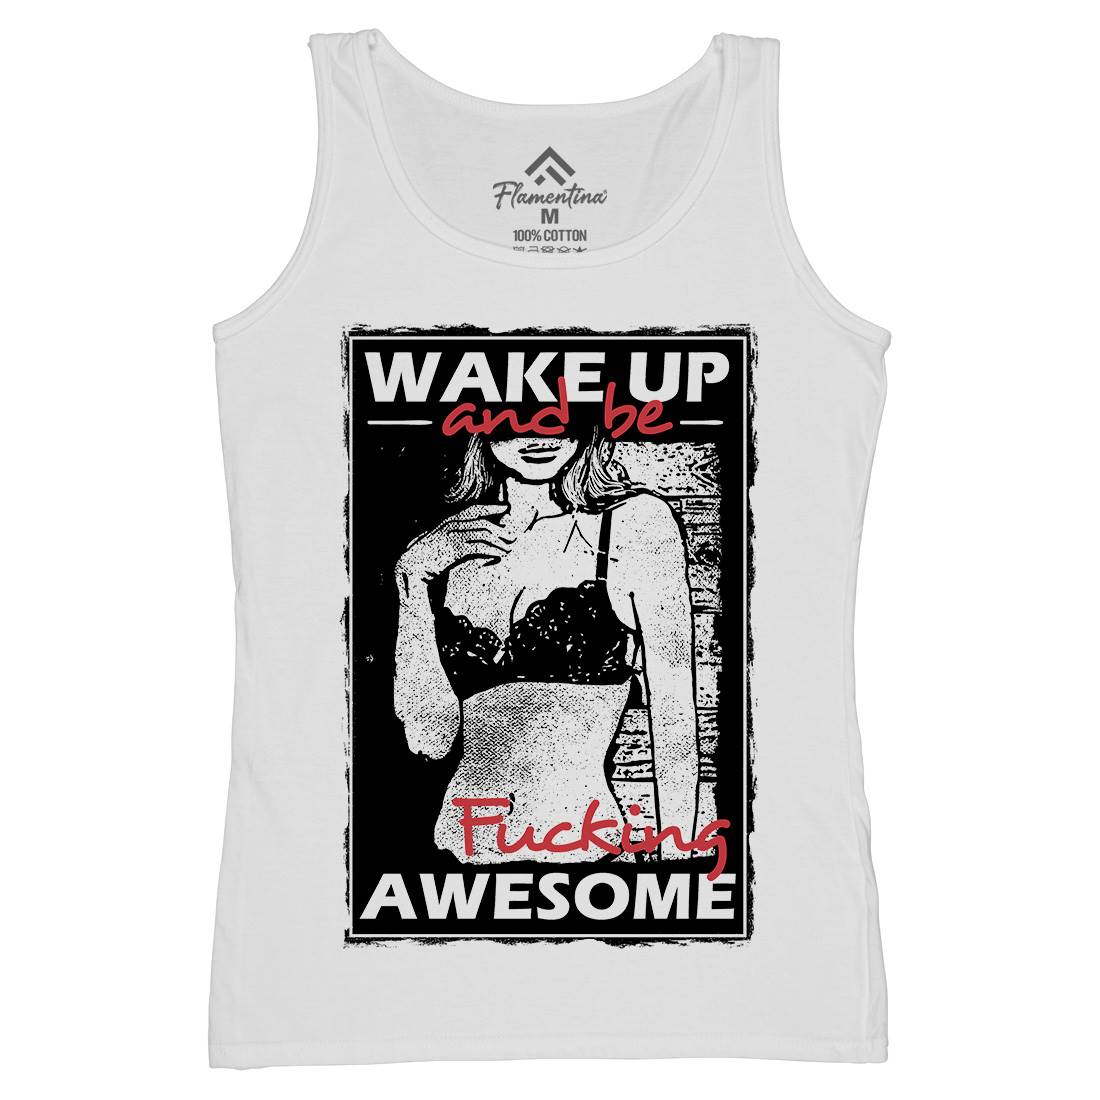 Wake Up And Be Awesome Womens Organic Tank Top Vest Gym C993